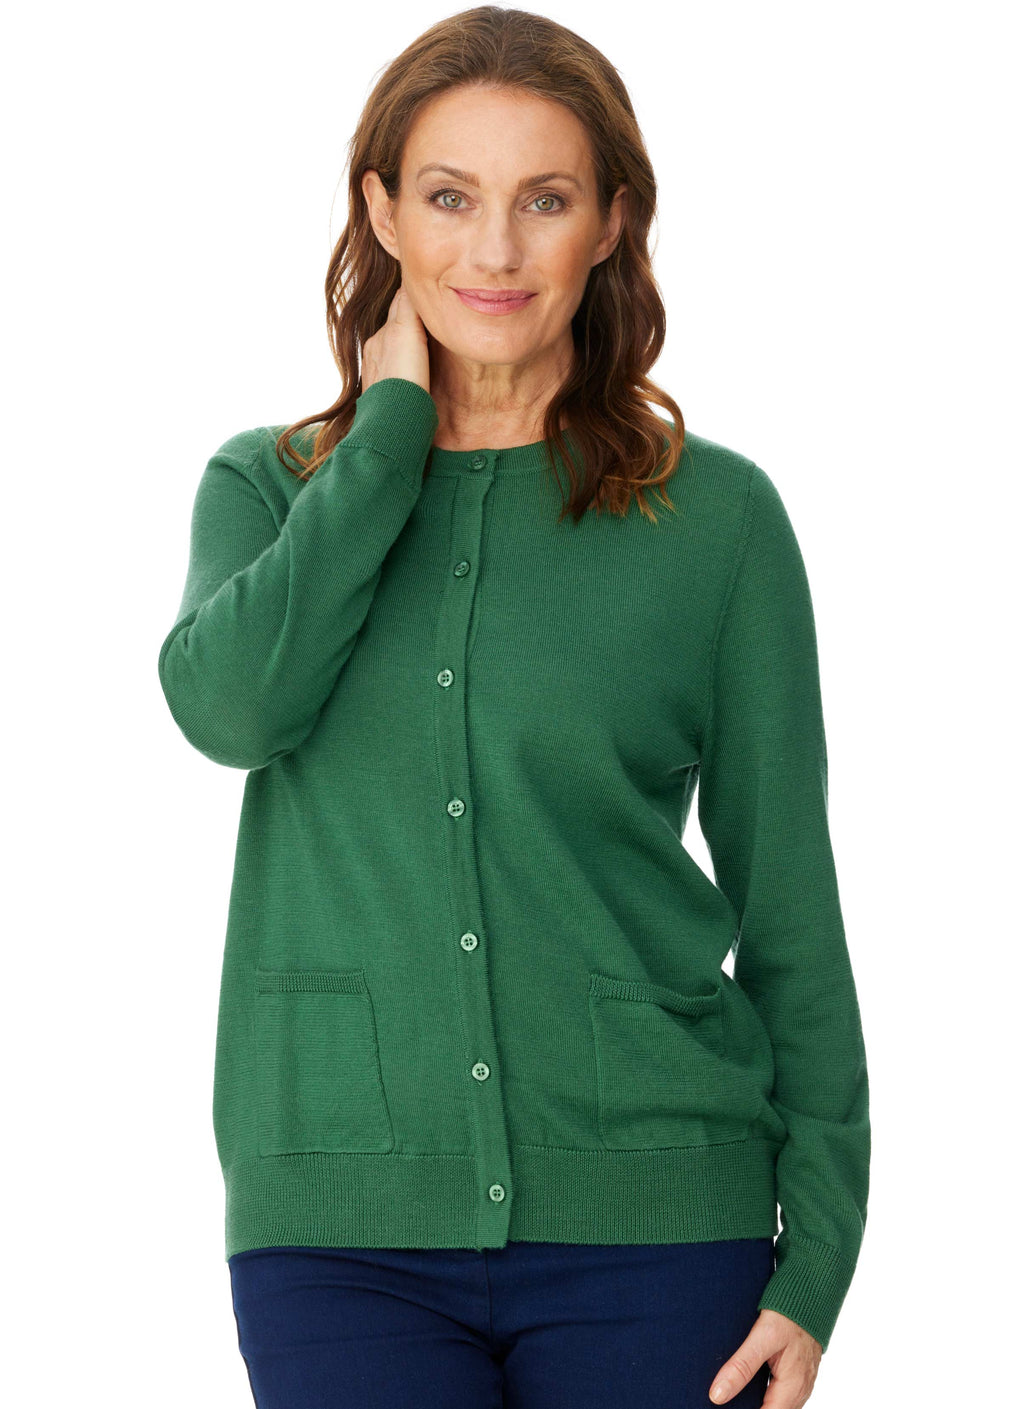 LEVENDALE CLASSIC CARDIGAN WITH POCKETS - FERN